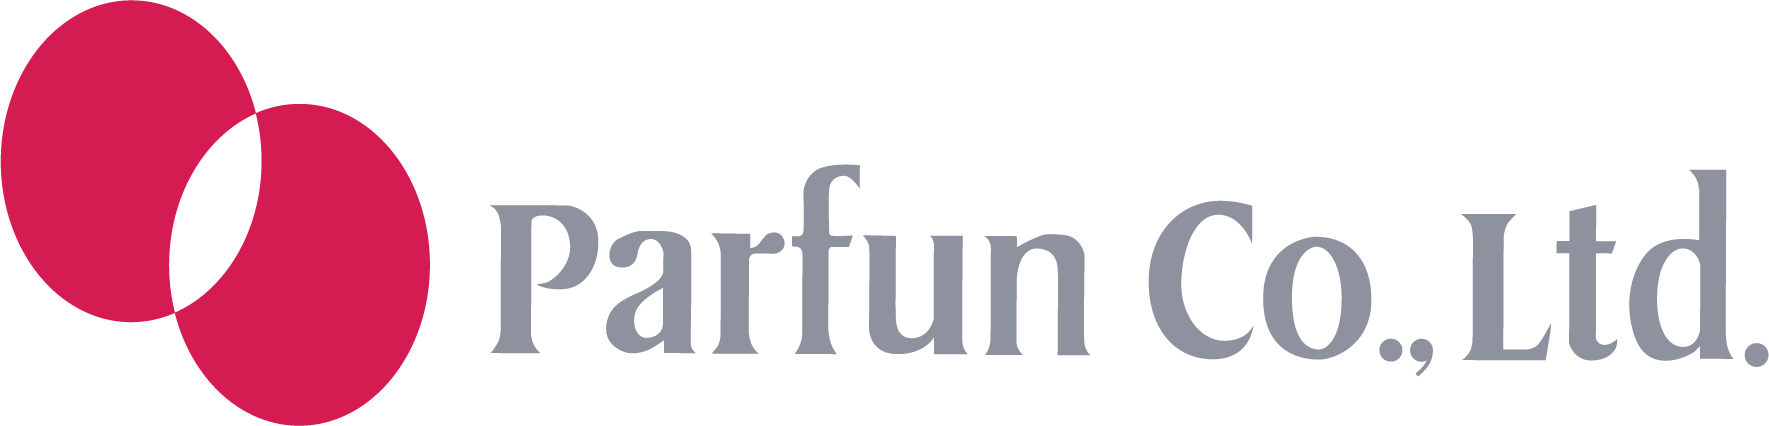 Parfun Co.,Ltd. | Apparel OEM and Fabric Maker with Japan Quality.